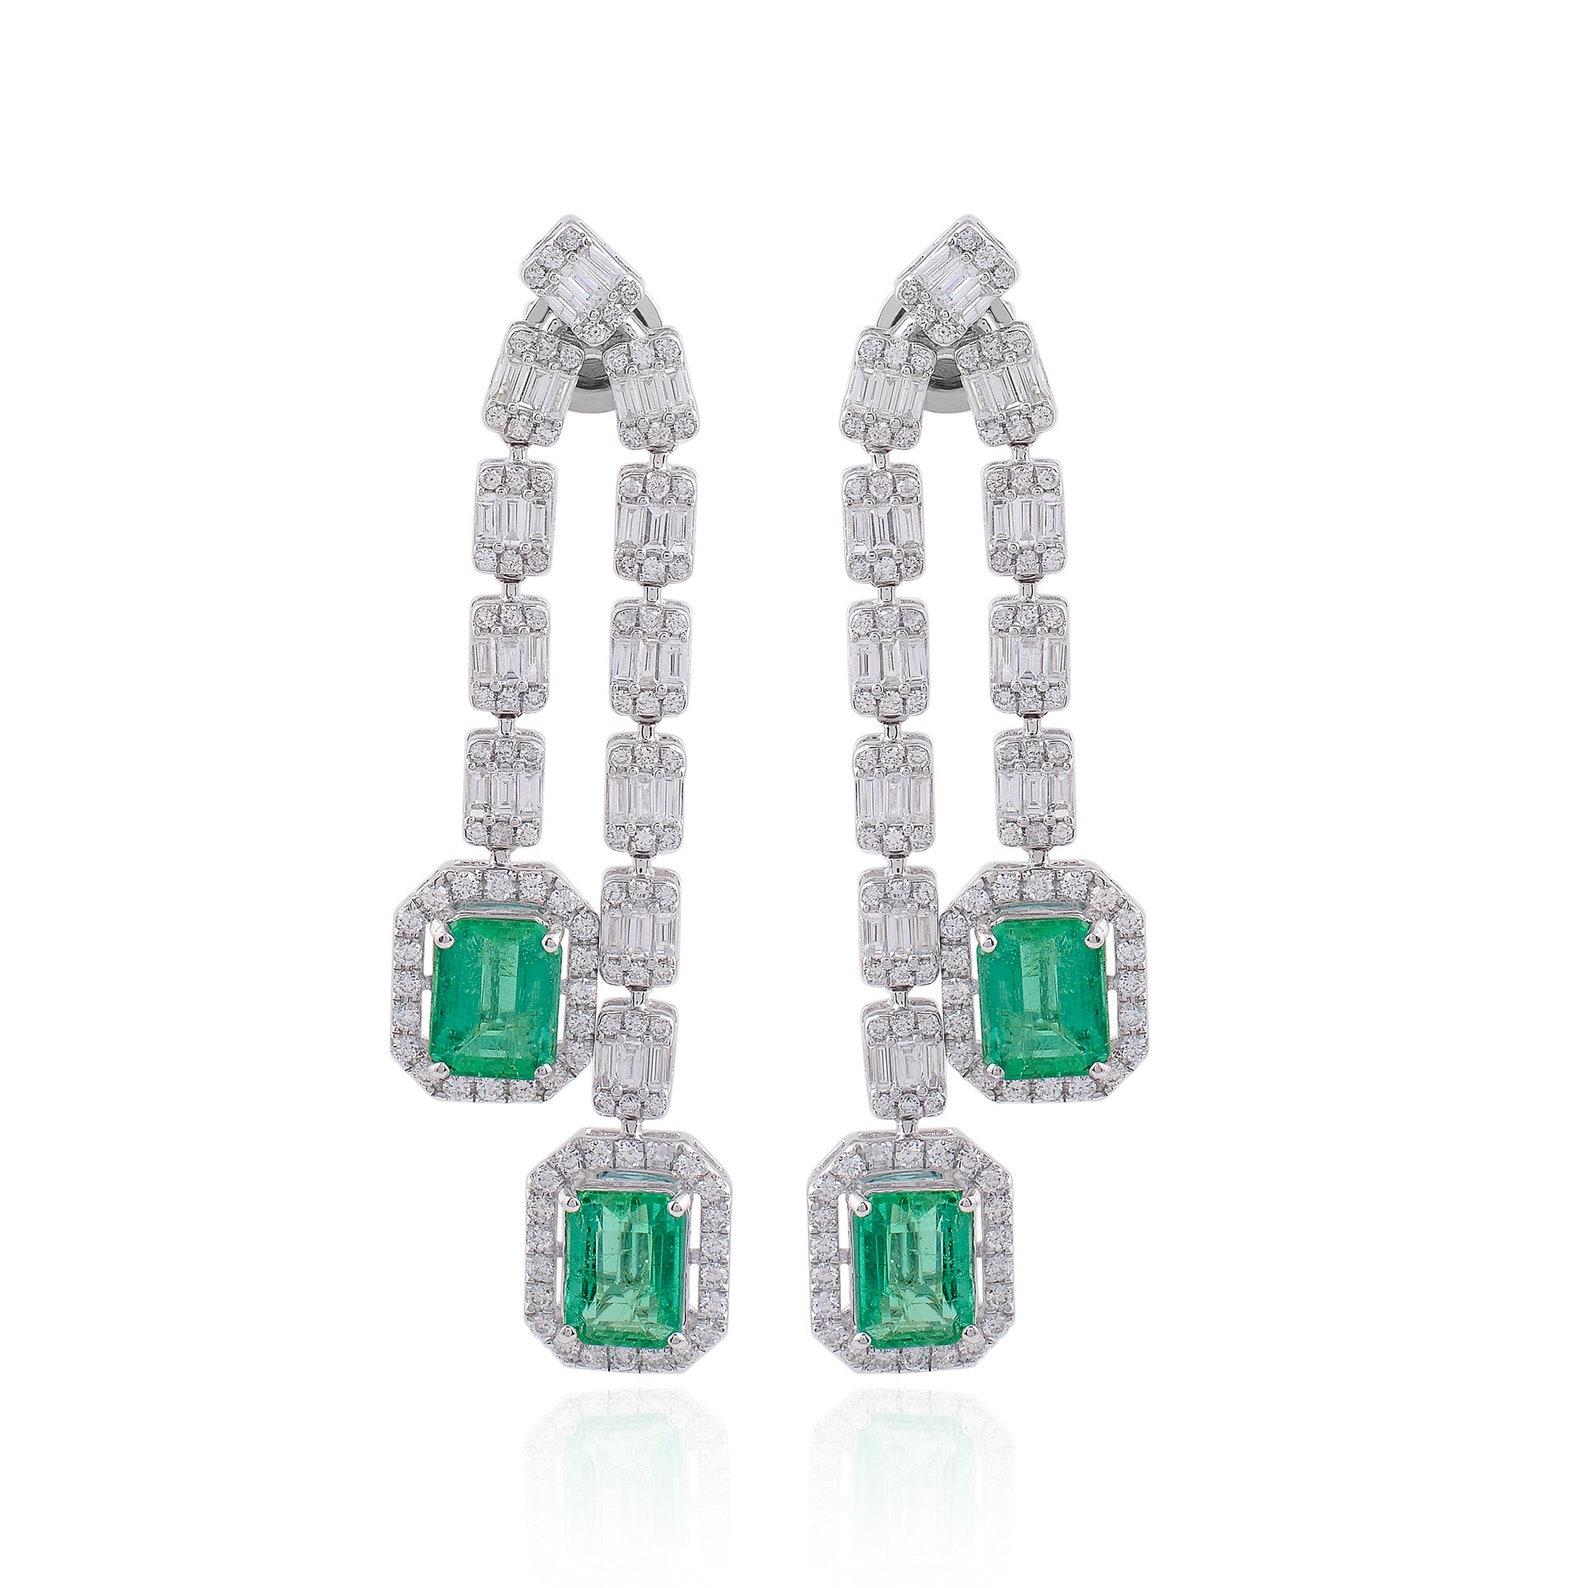 Cast in 14 karat gold, these exquisite earrings are hand set with 5.0 carats emerald and 3.40 carats of glimmering diamonds. 

FOLLOW MEGHNA JEWELS storefront to view the latest collection & exclusive pieces. Meghna Jewels is proudly rated as a Top